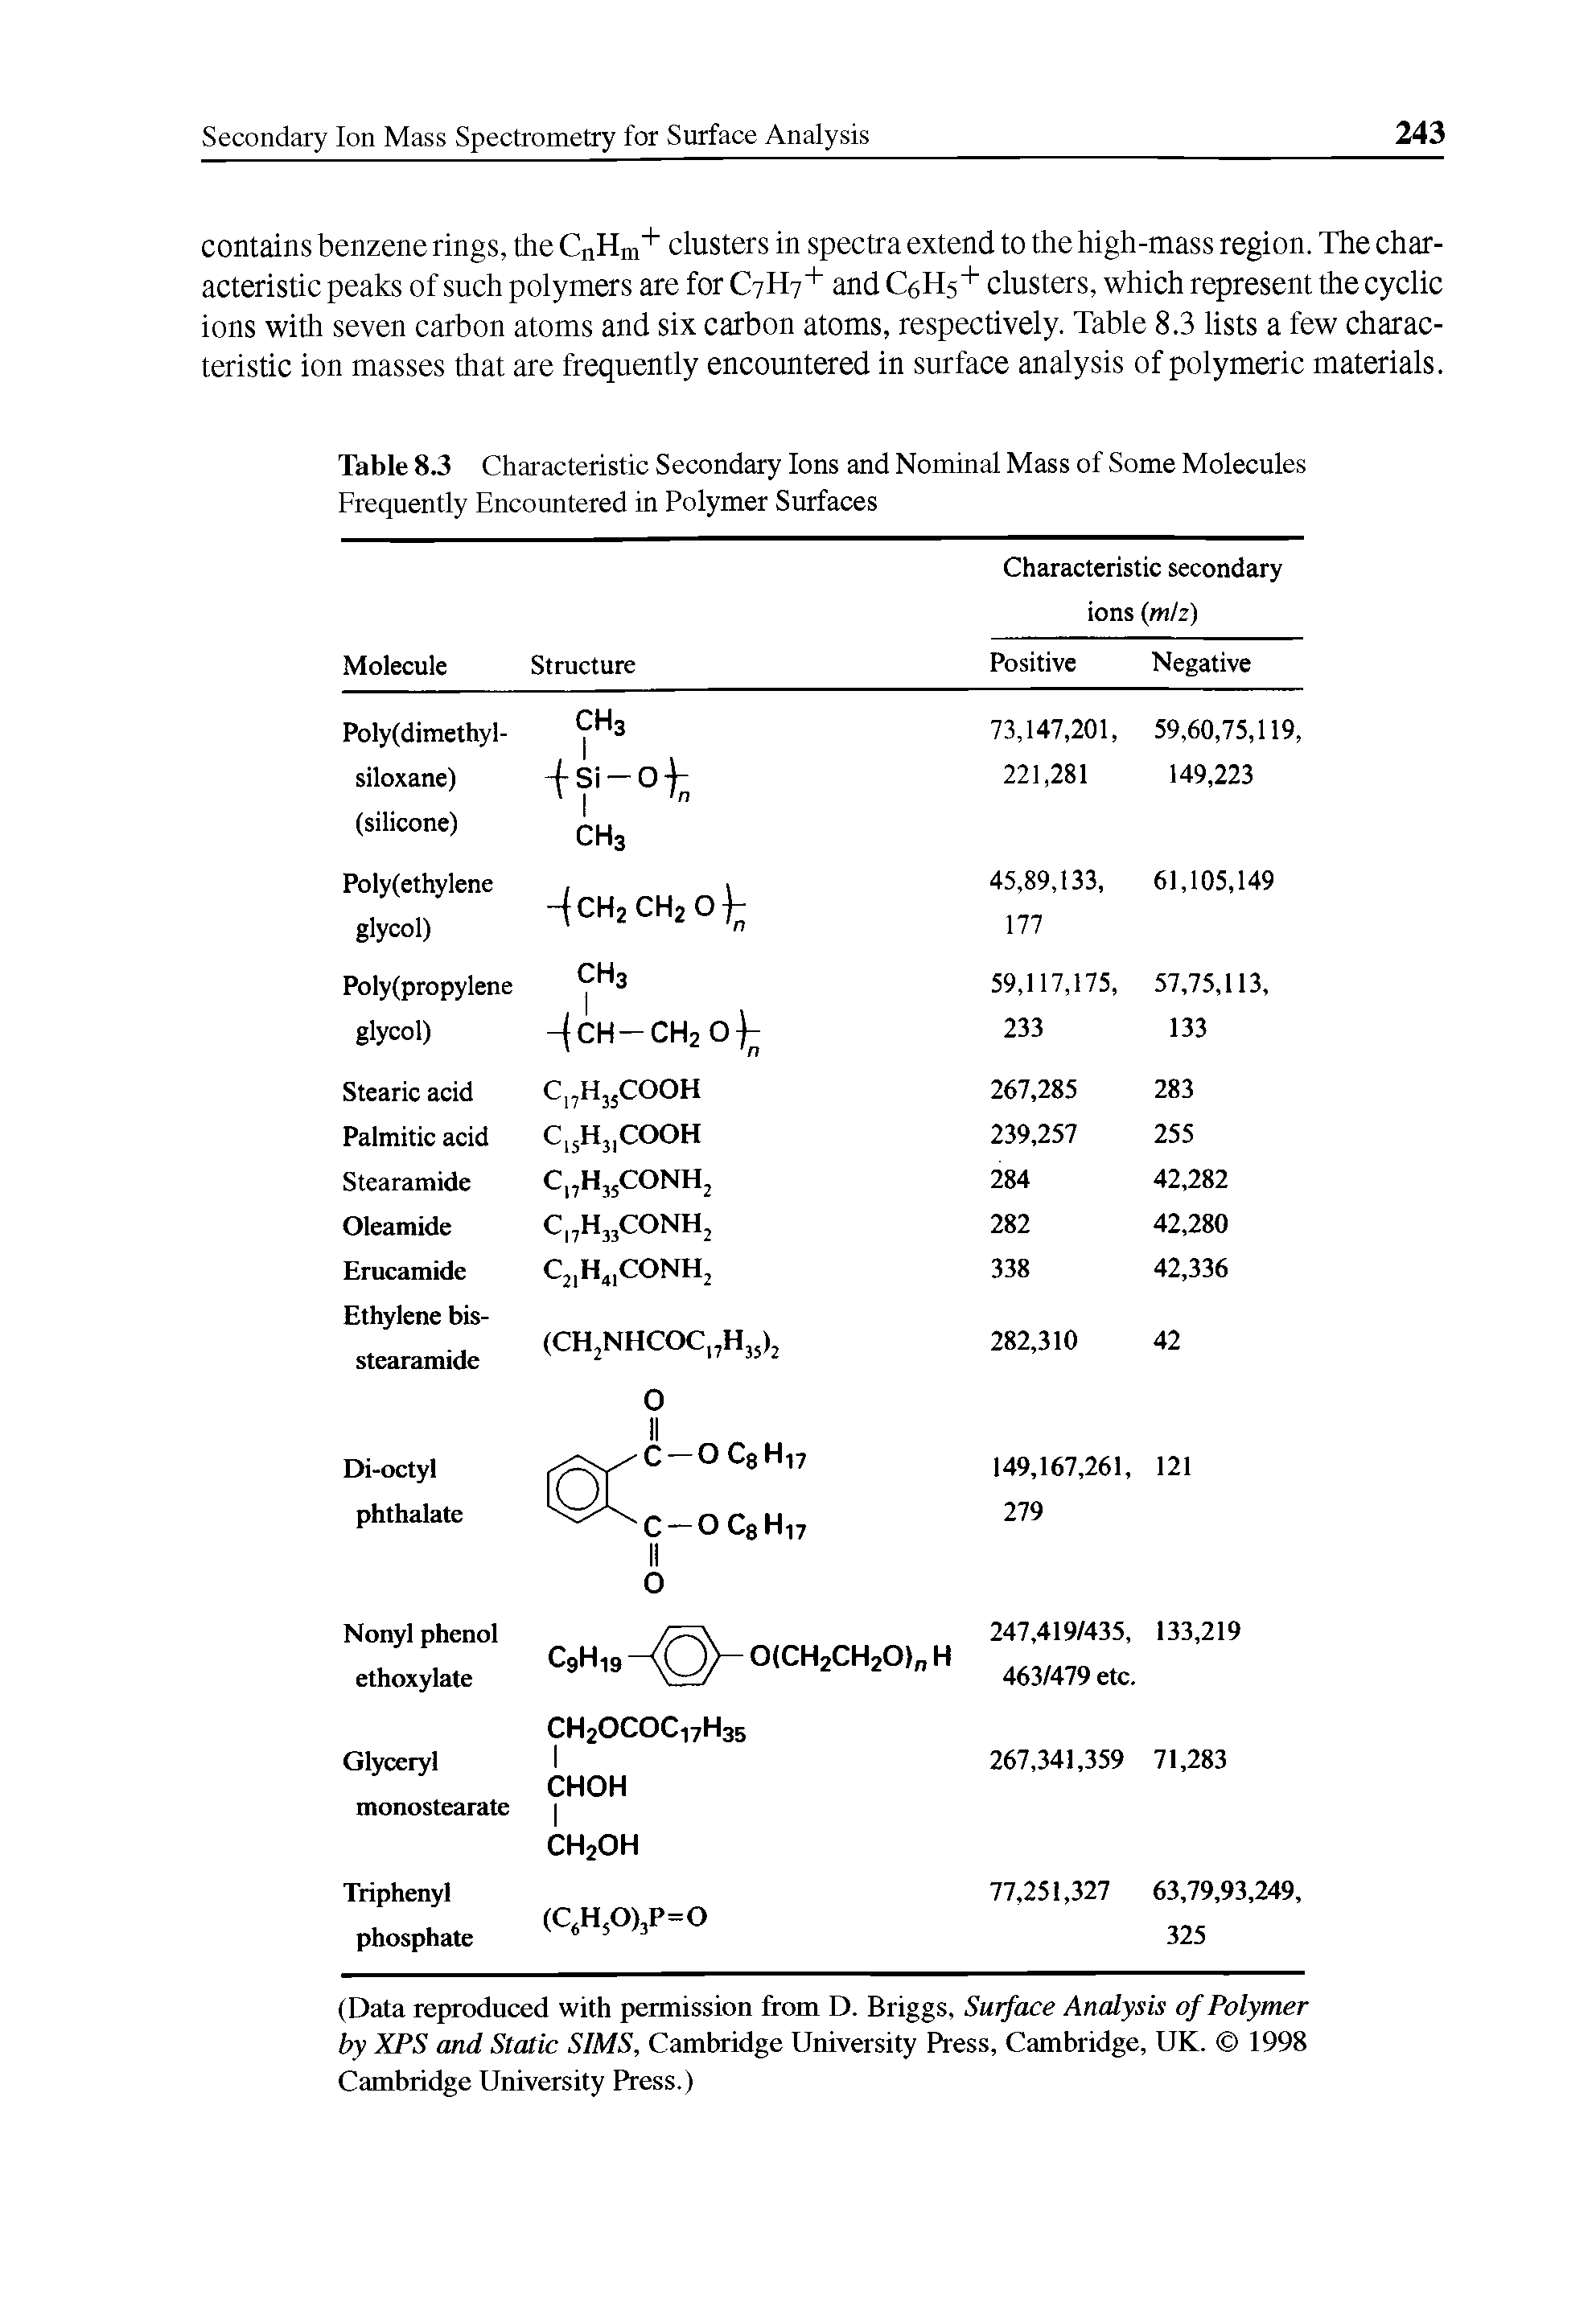 Table 8.3 Characteristic Secondary Ions and Nominal Mass of Some Molecules Frequently Encountered in Polymer Surfaces...